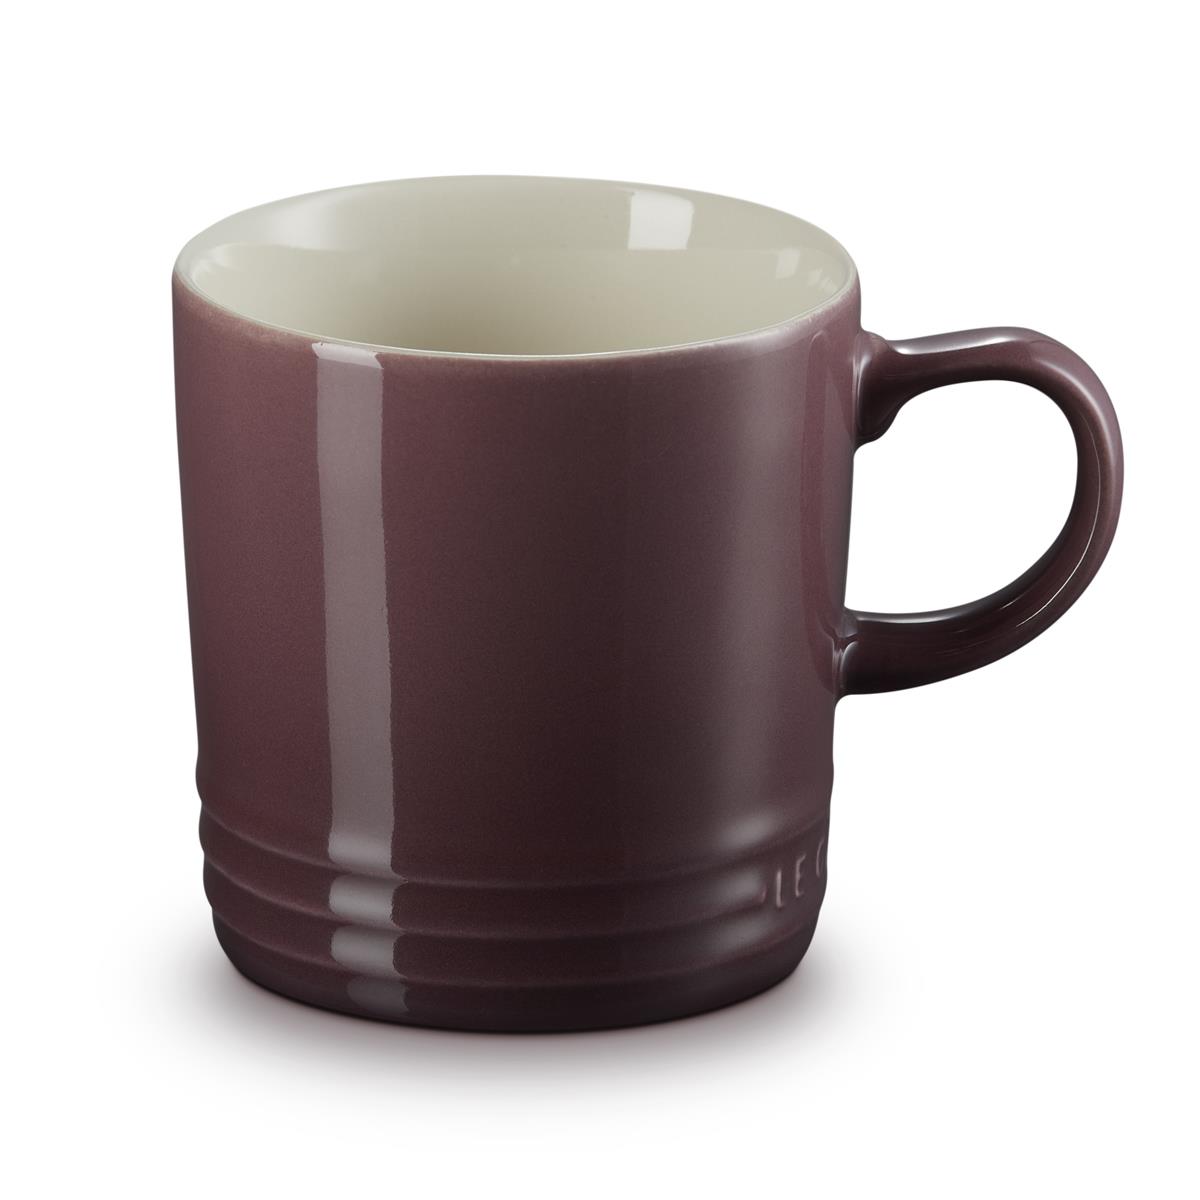 Is this Le Creuset stoneware mug 14oz to the brim or slightly larger?